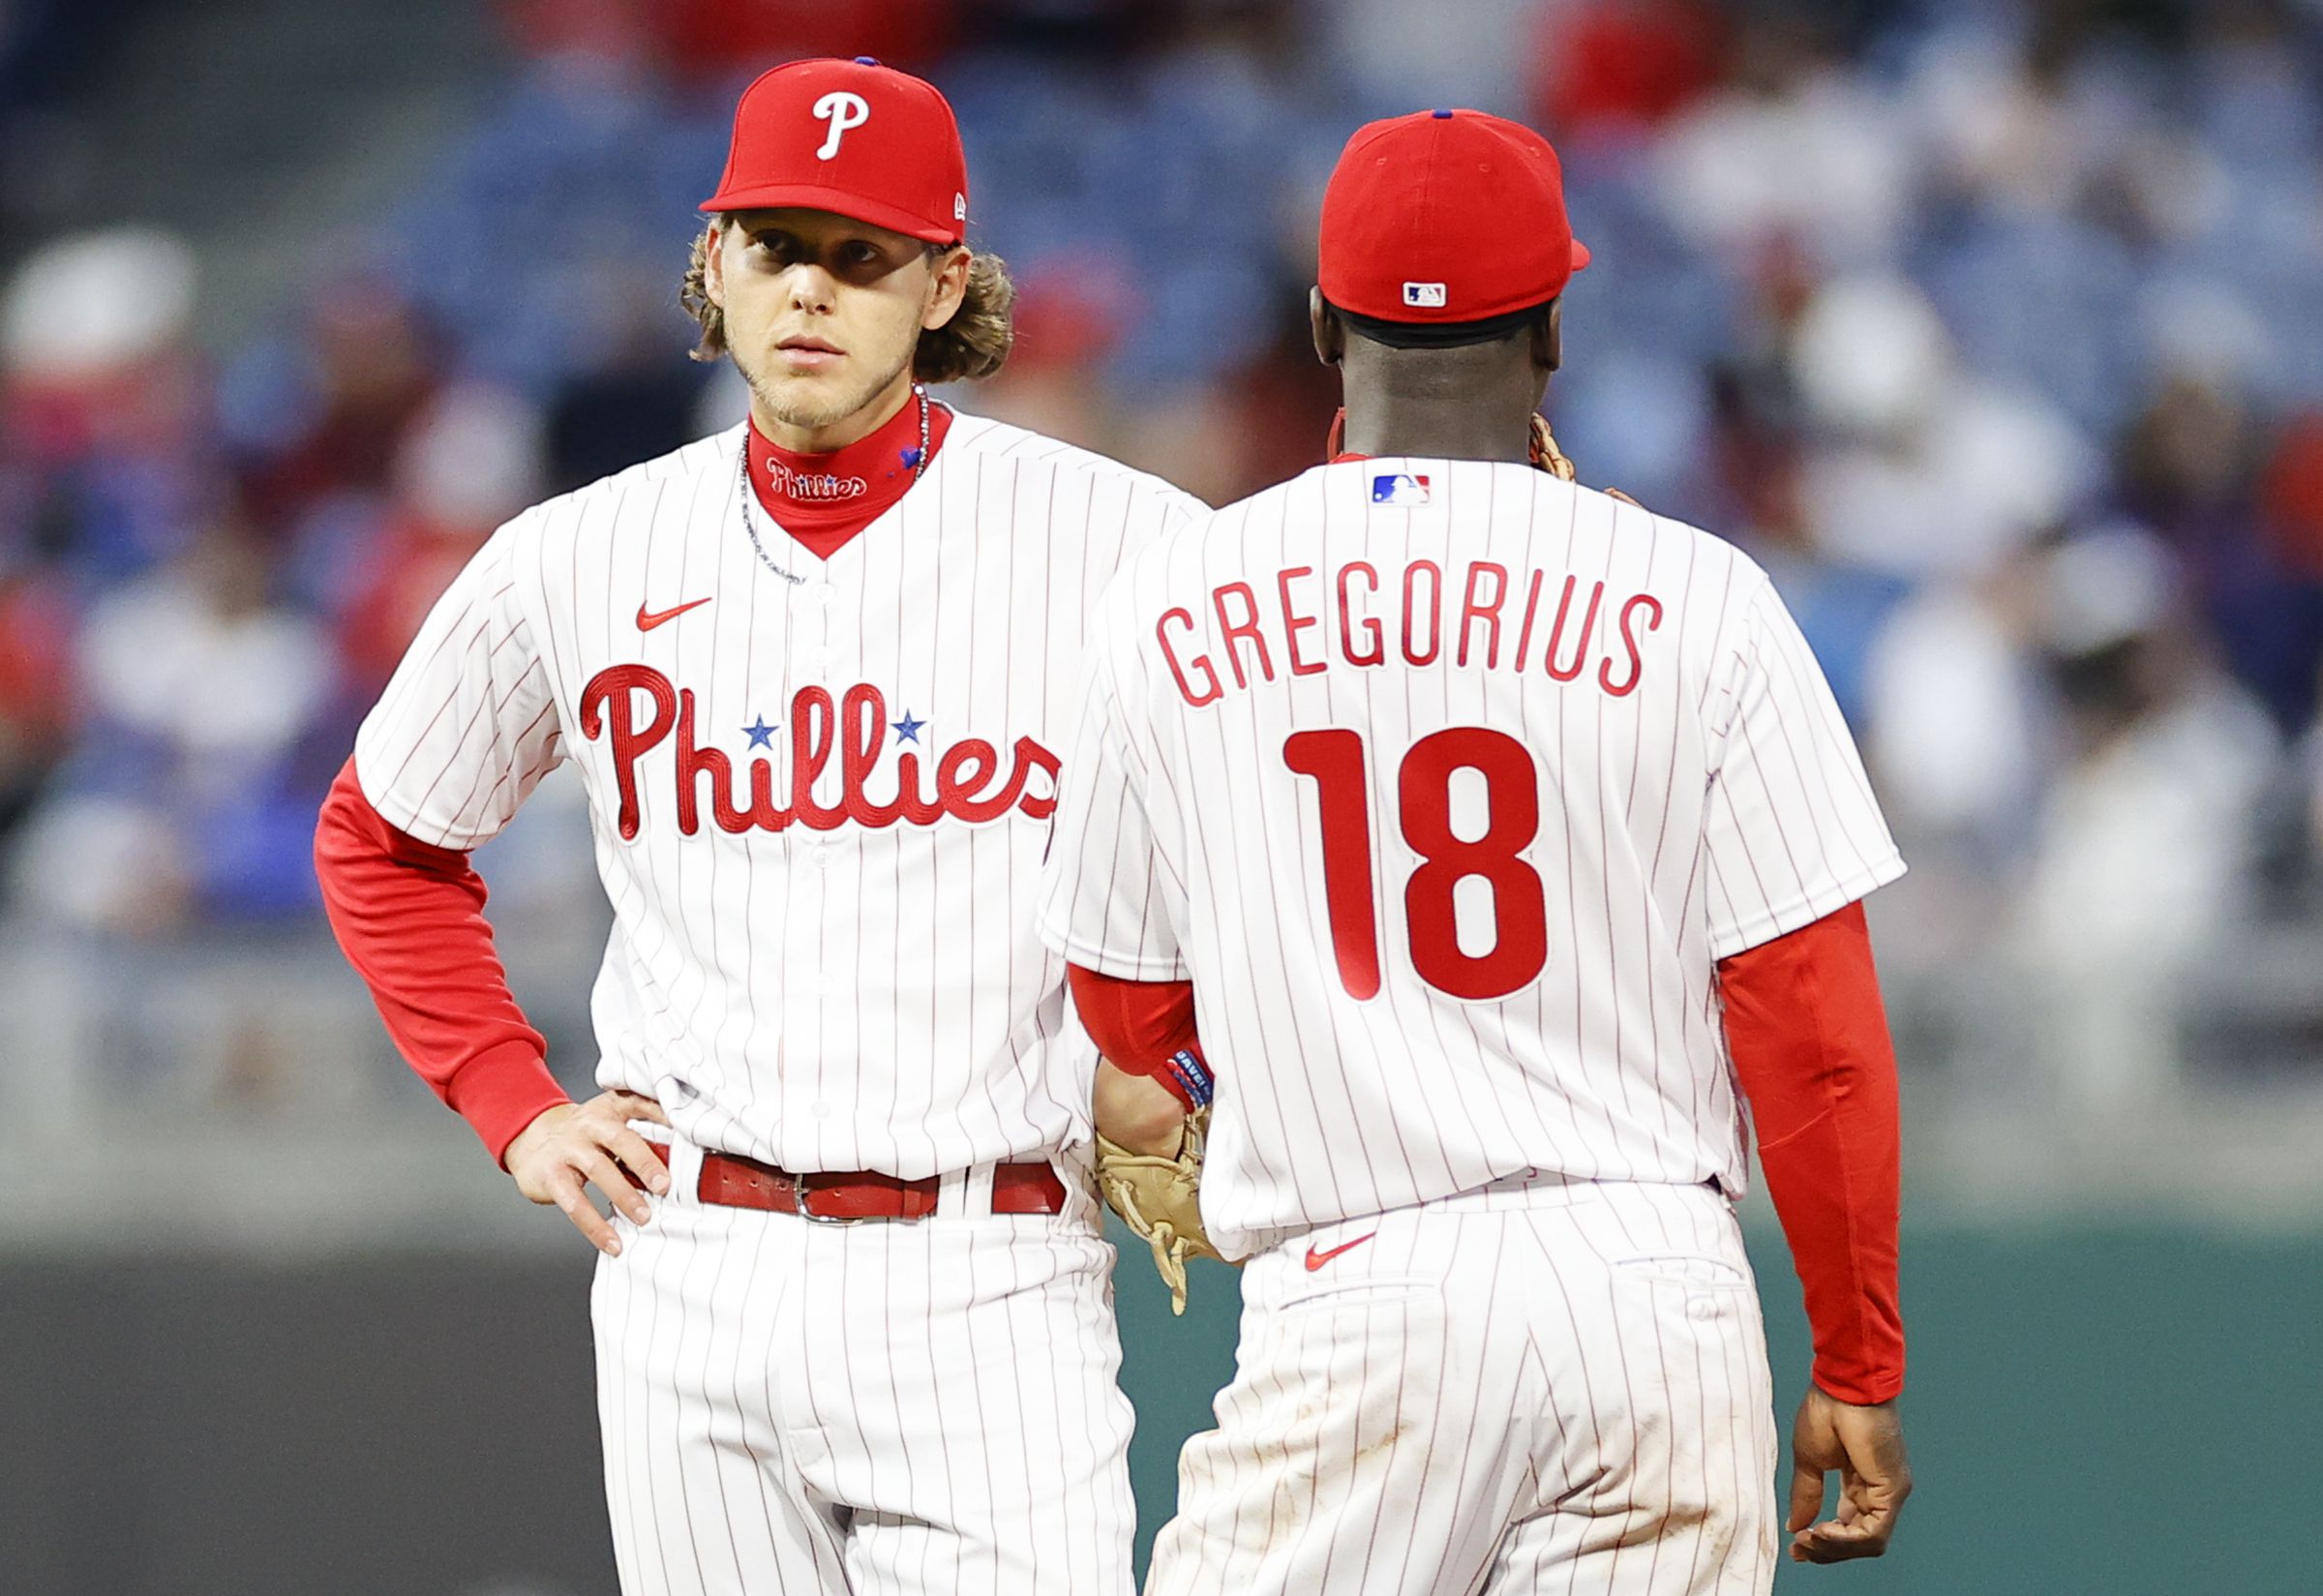 Alec Bohm or Didi Gregorius: Who can the Phillies expect more from